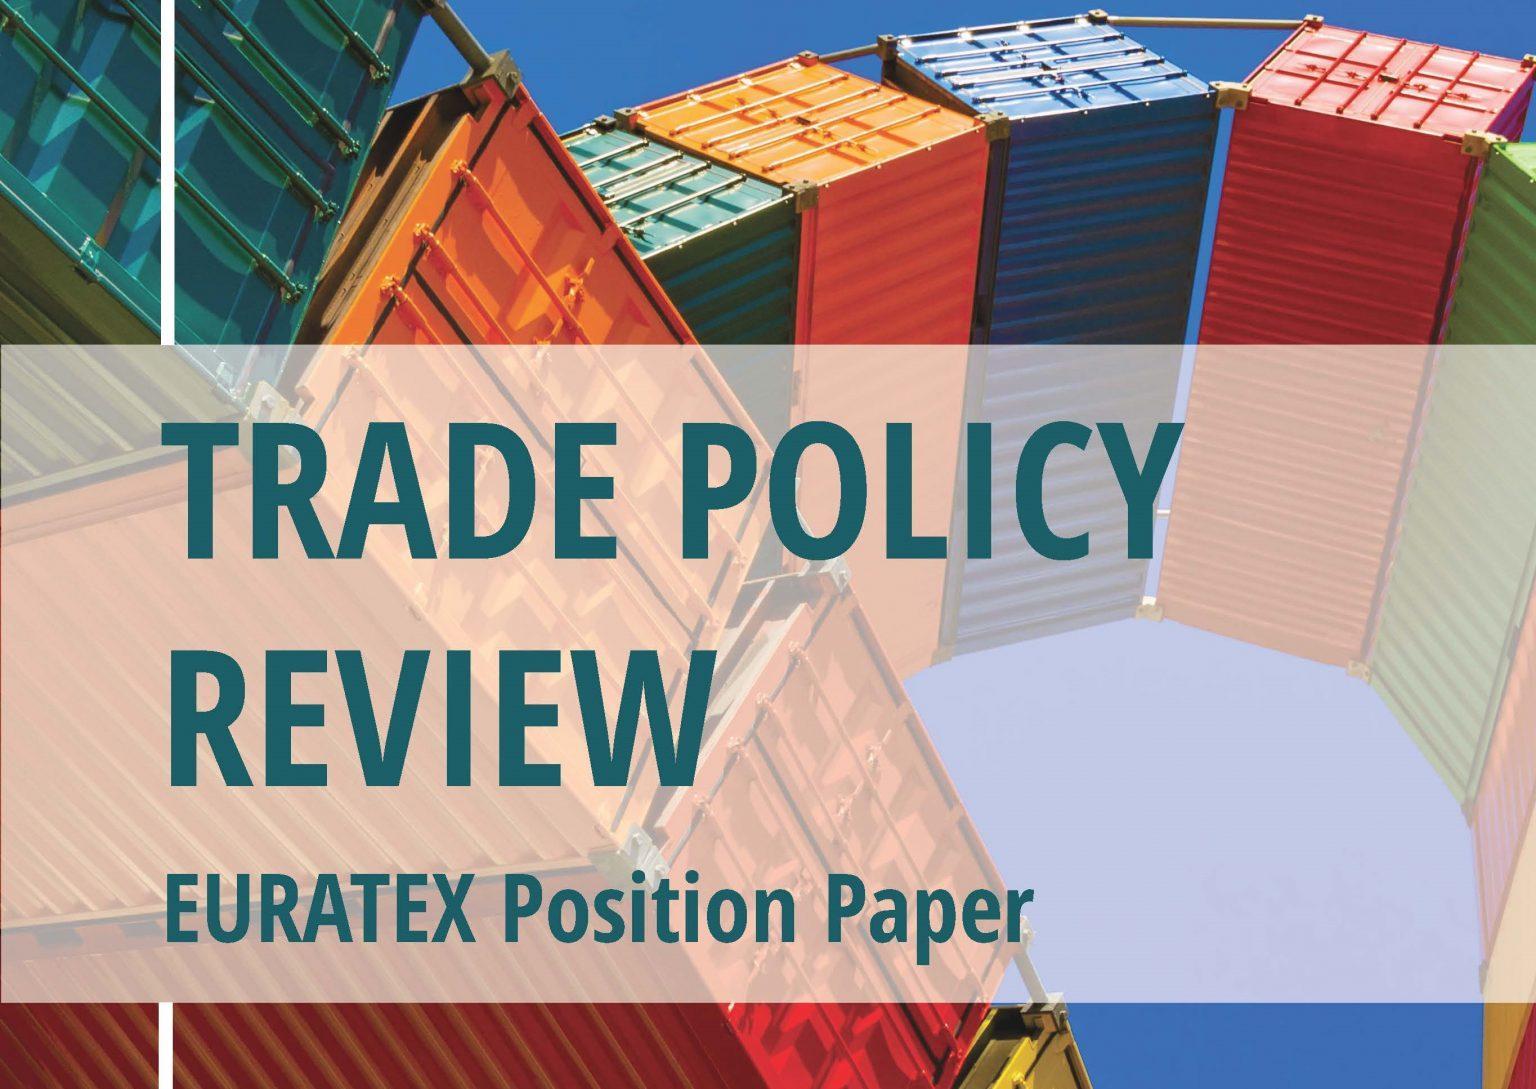 Euratex Position Paper in response to the EU consultations on Trade Policy Review